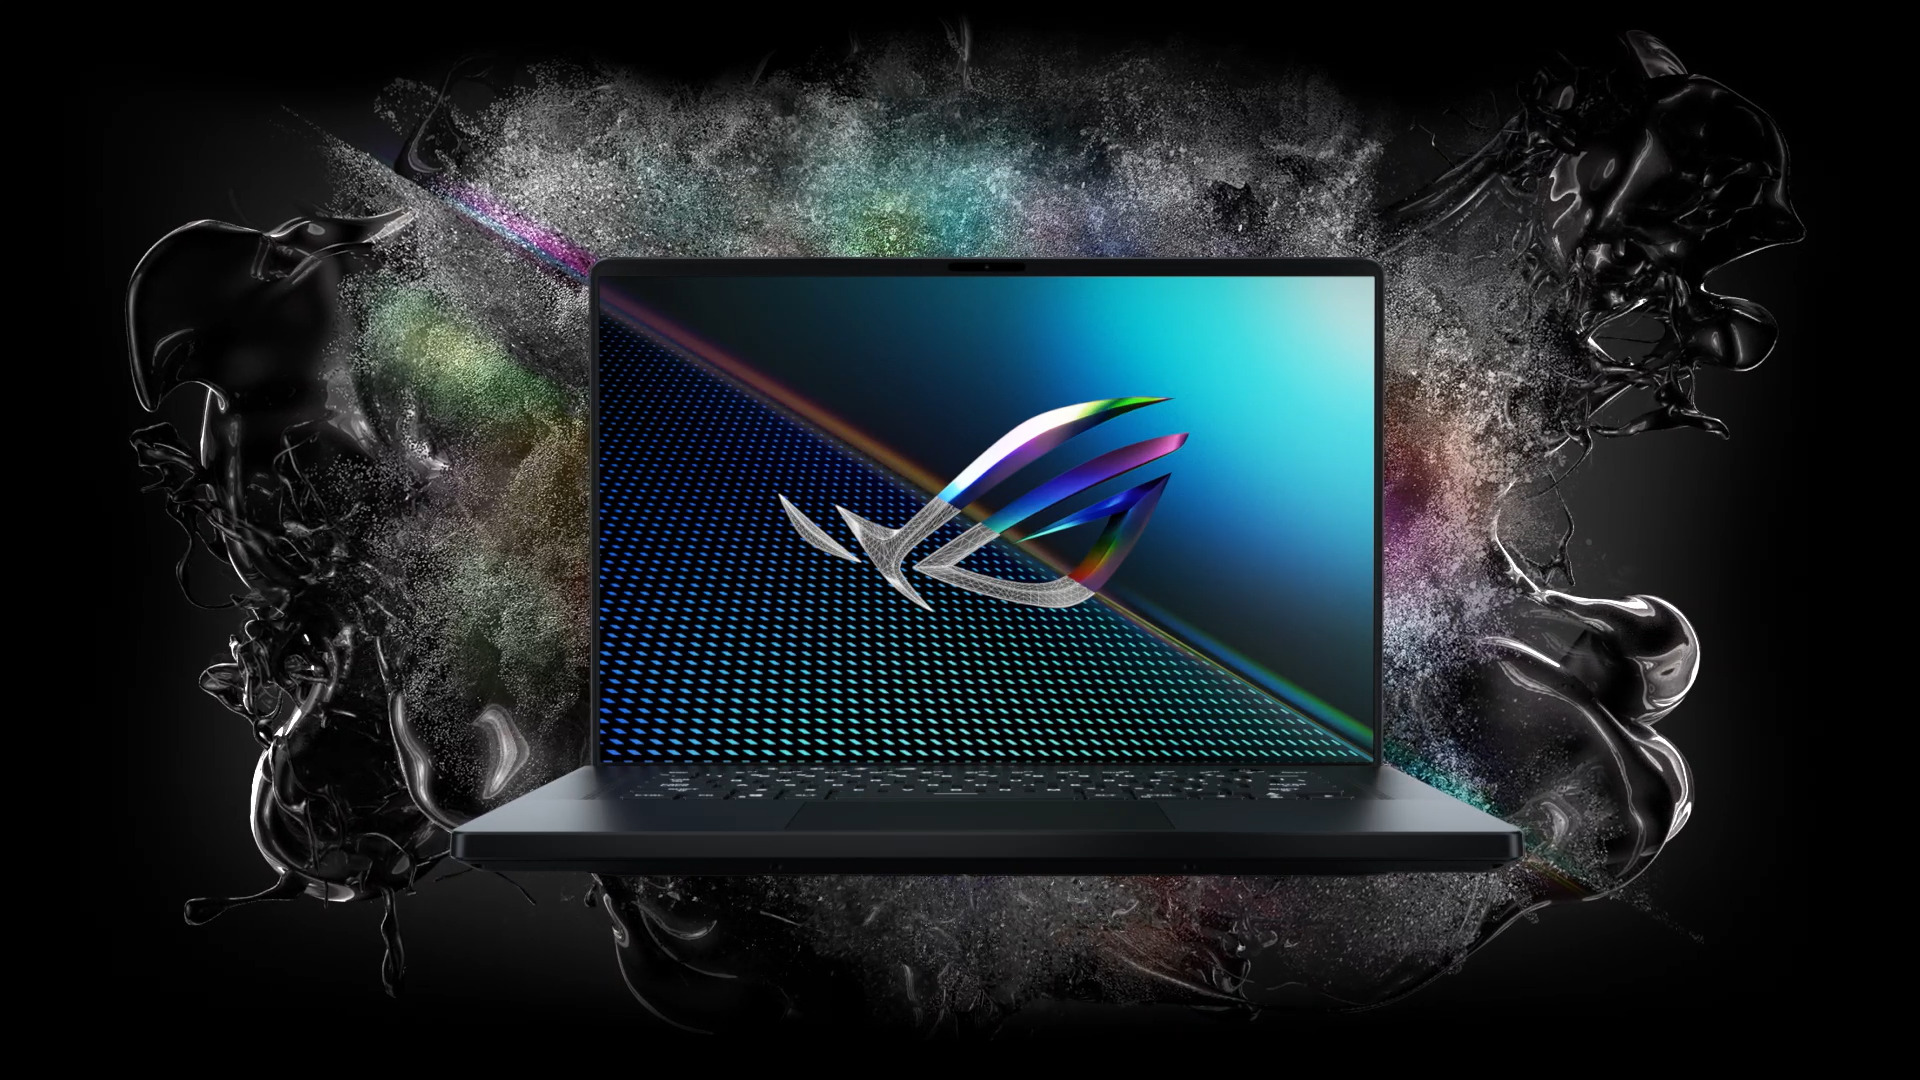 Asus ROG Zephyrus M16: a retailer lists what appears to be an entry-level  version of the new gaming laptop - NotebookCheck.net News